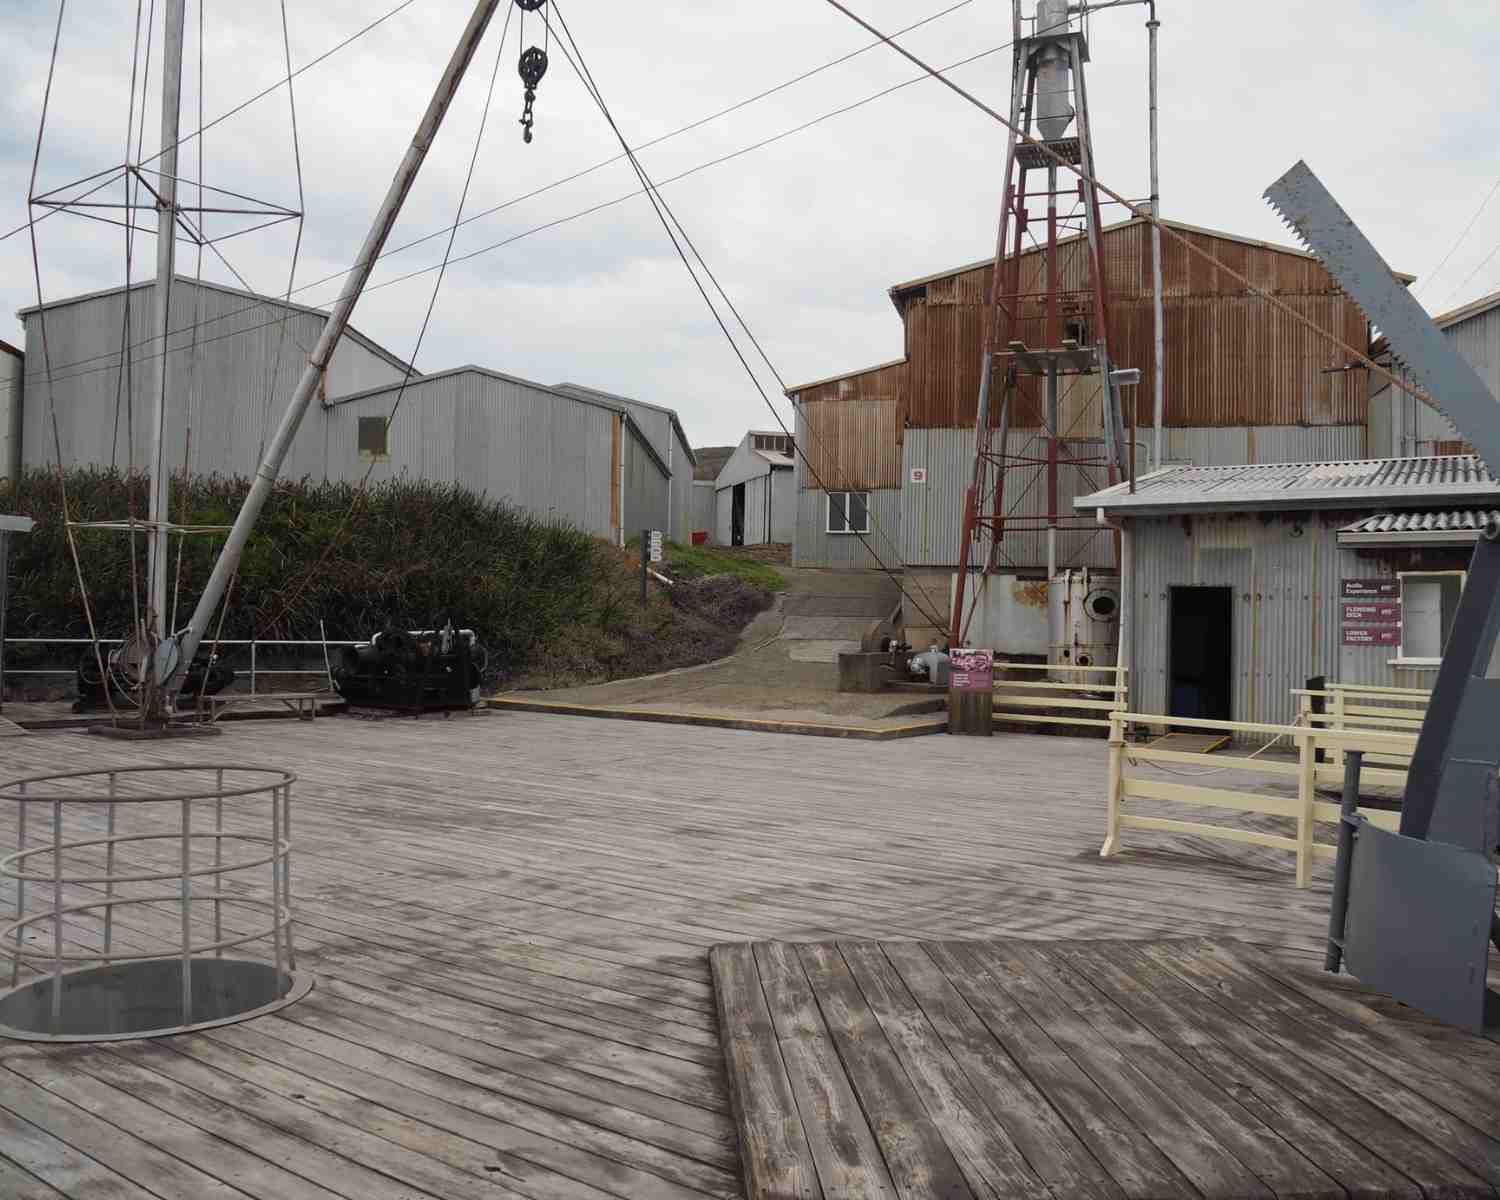 The cutting area at Albany's whaling station